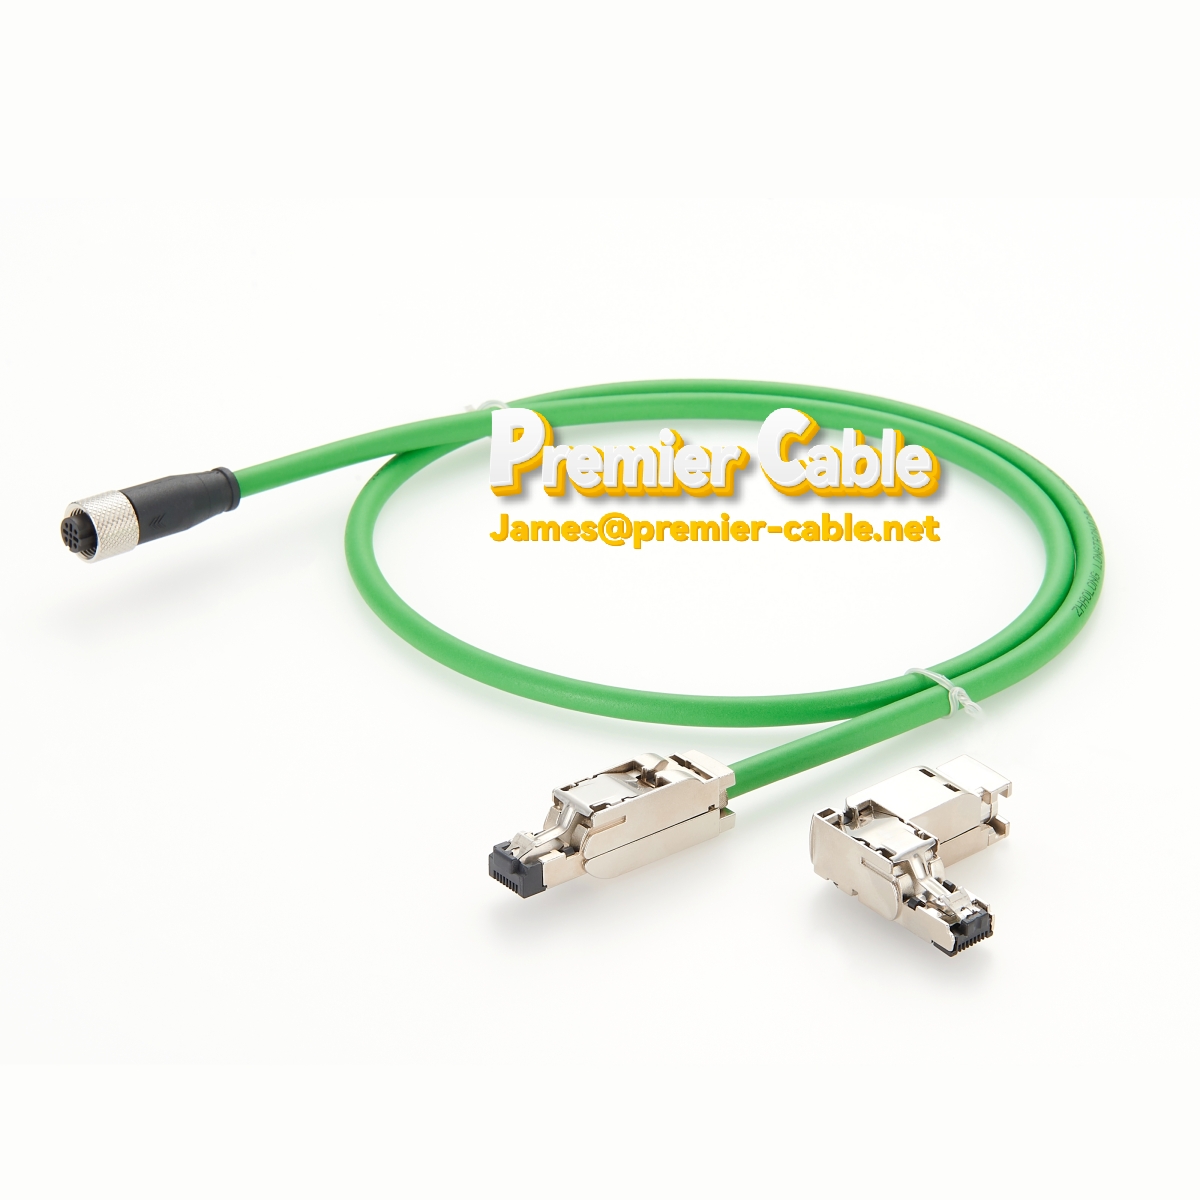 M12 4 Pin D Coded Female Connector to RJ45 Cat5e Profinet Cable